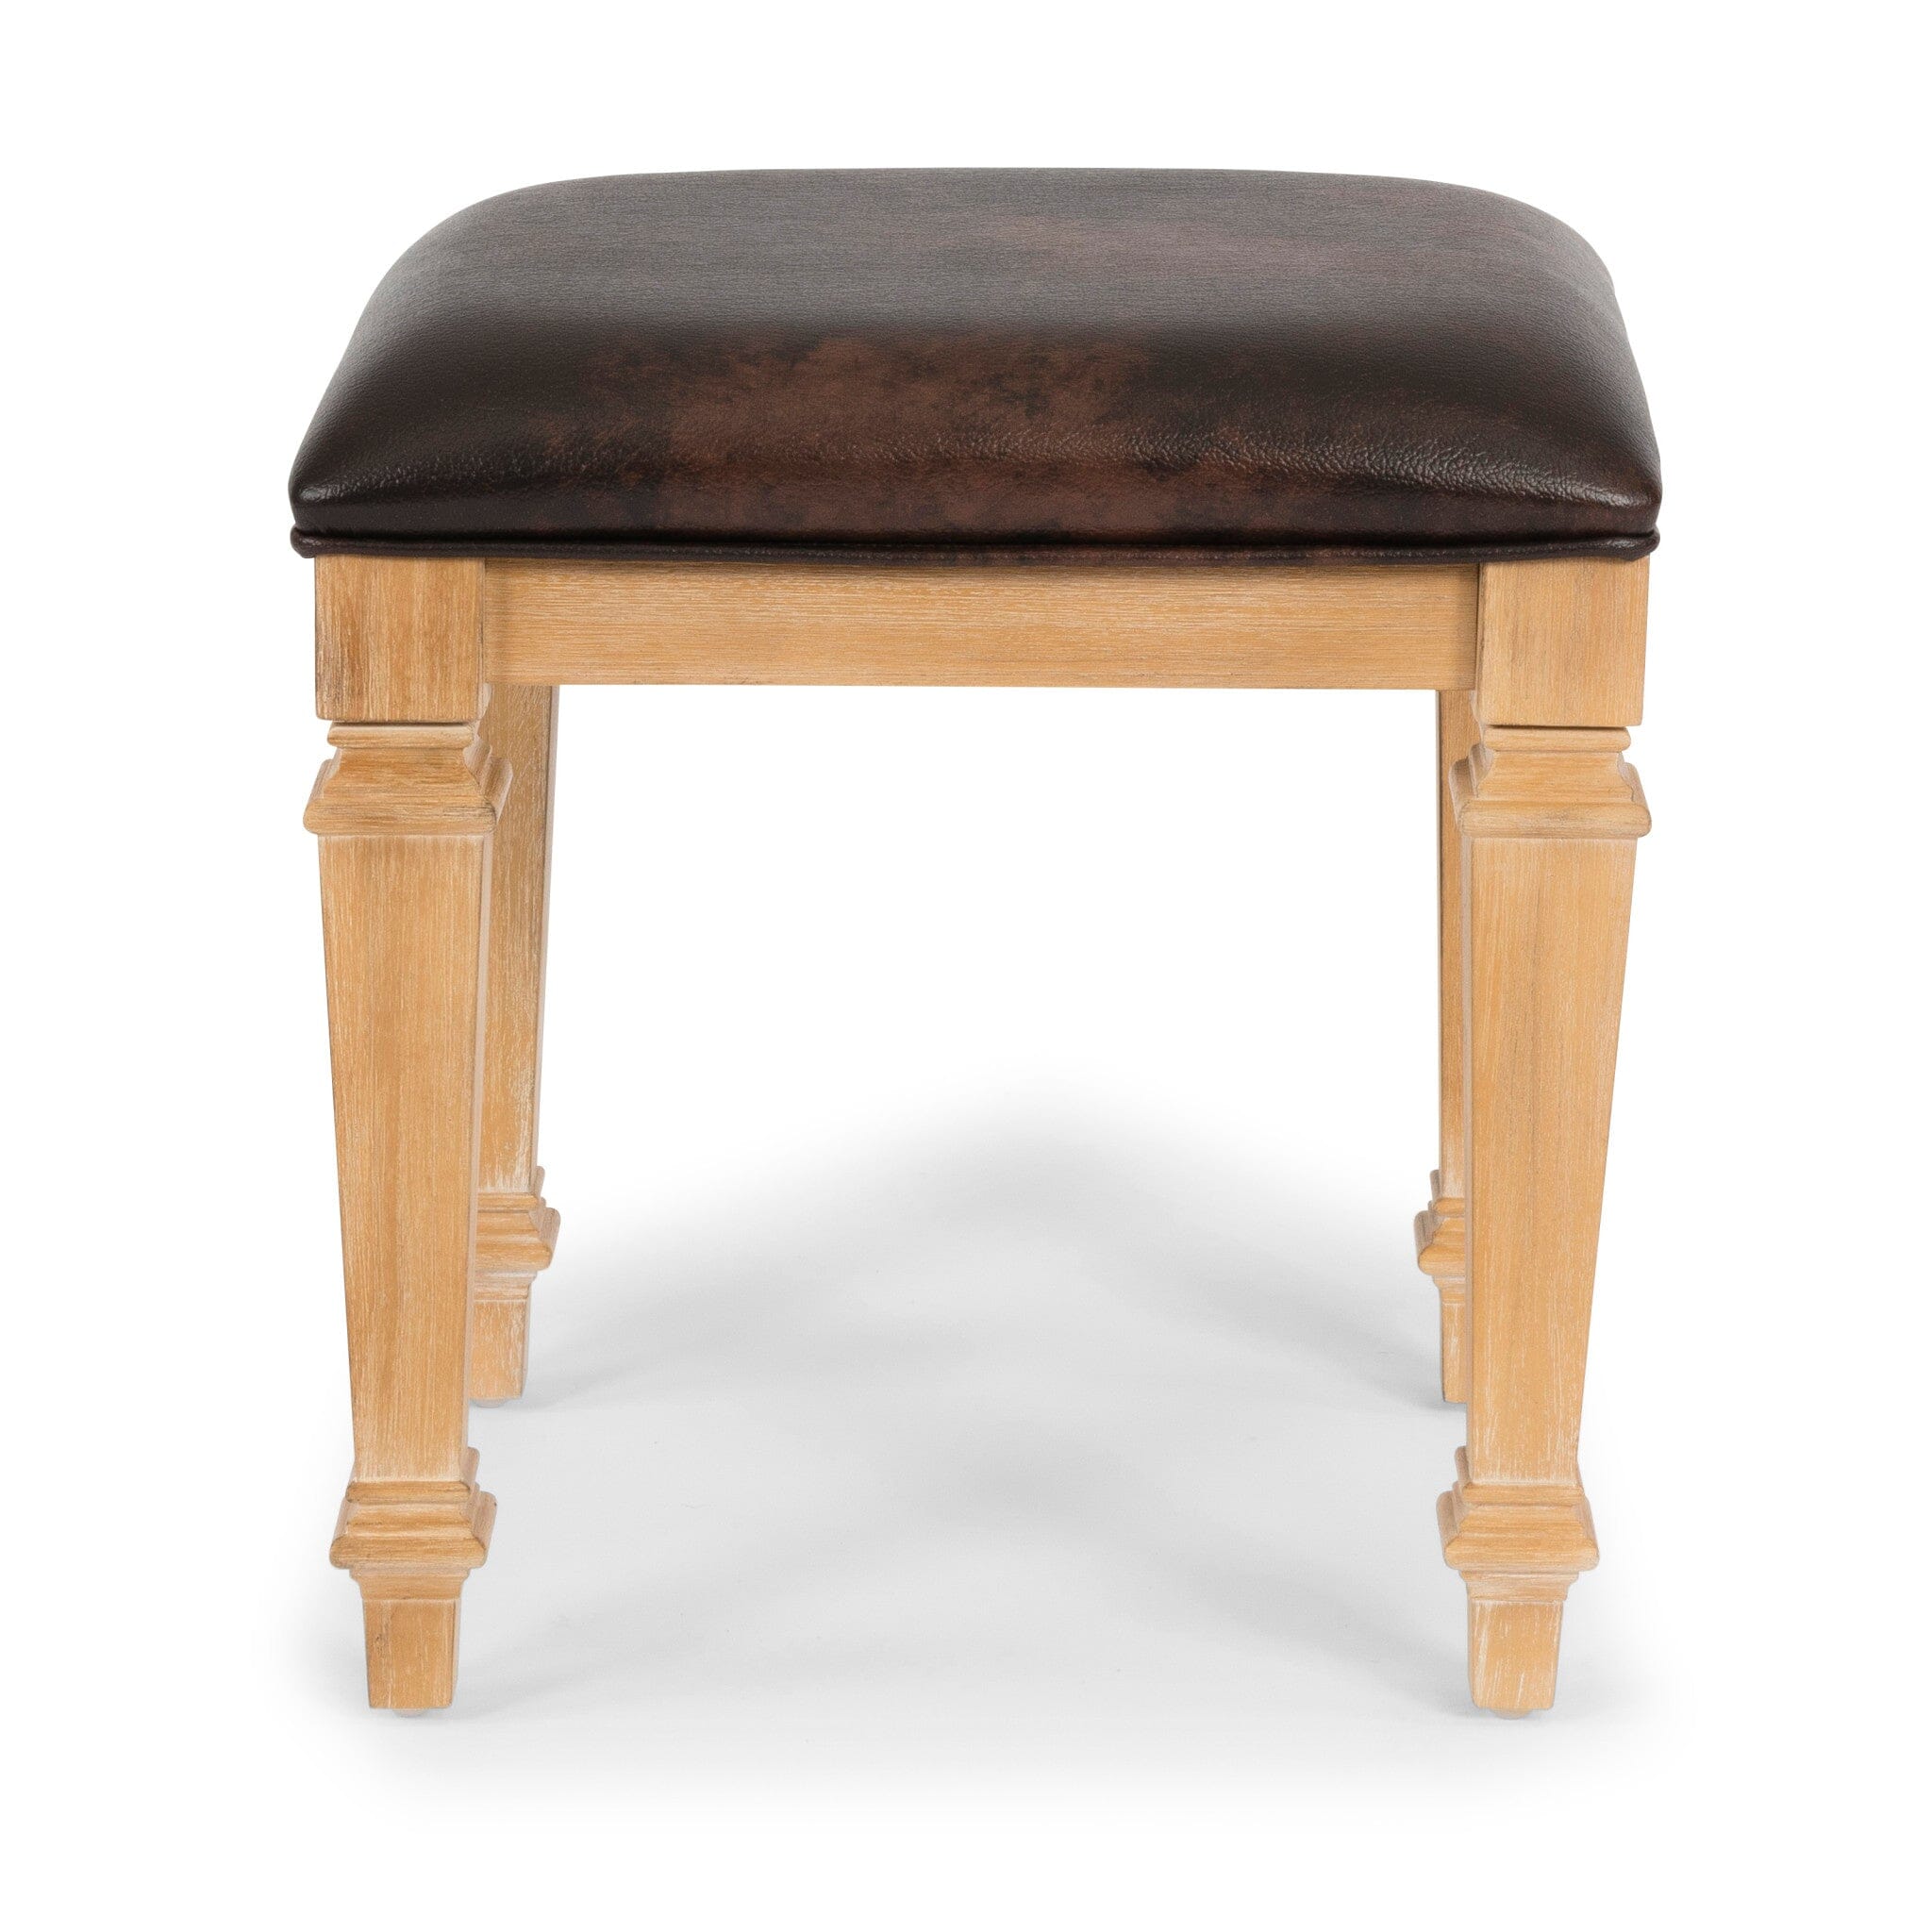 Traditional Vanity Bench By Manor House Vanity Bench Manor House